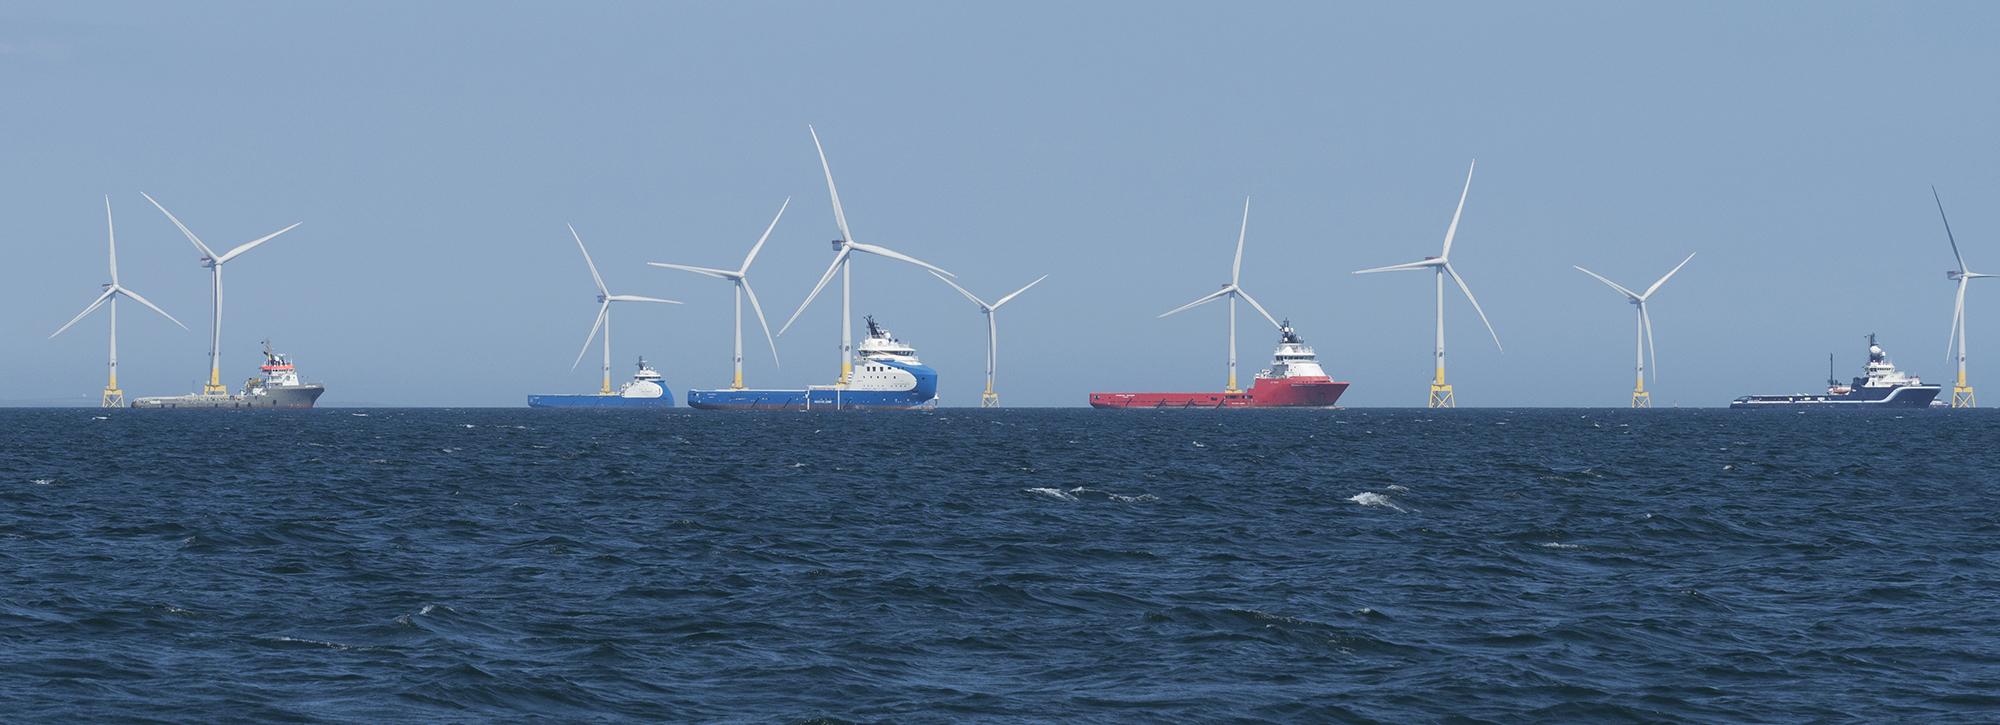 Panoramic view of offshore windfarms for renewable energy